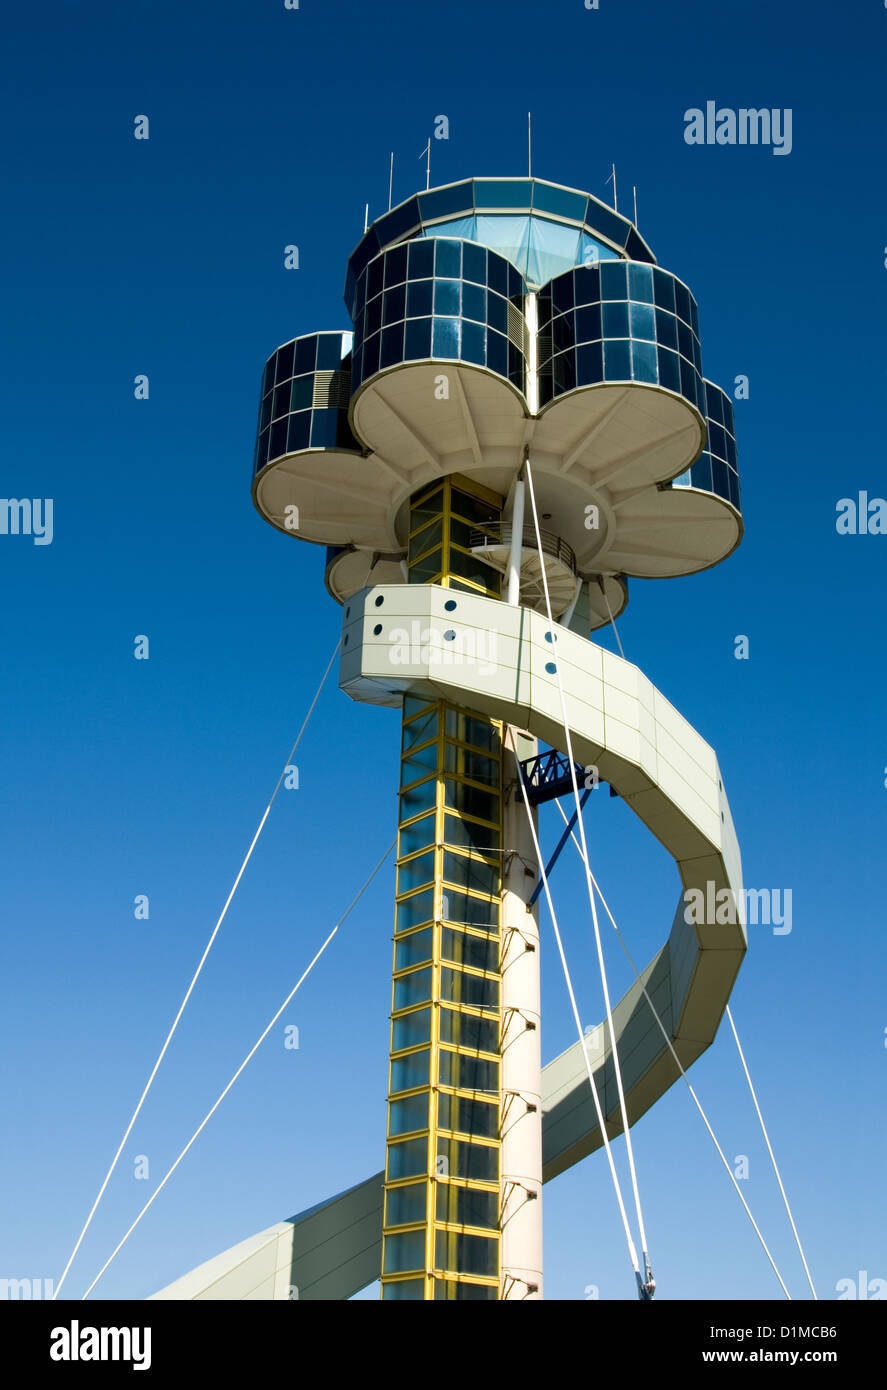 The air traffic control tower at Sydney's Kingsford-Smith Airport, Australia Stock Photo